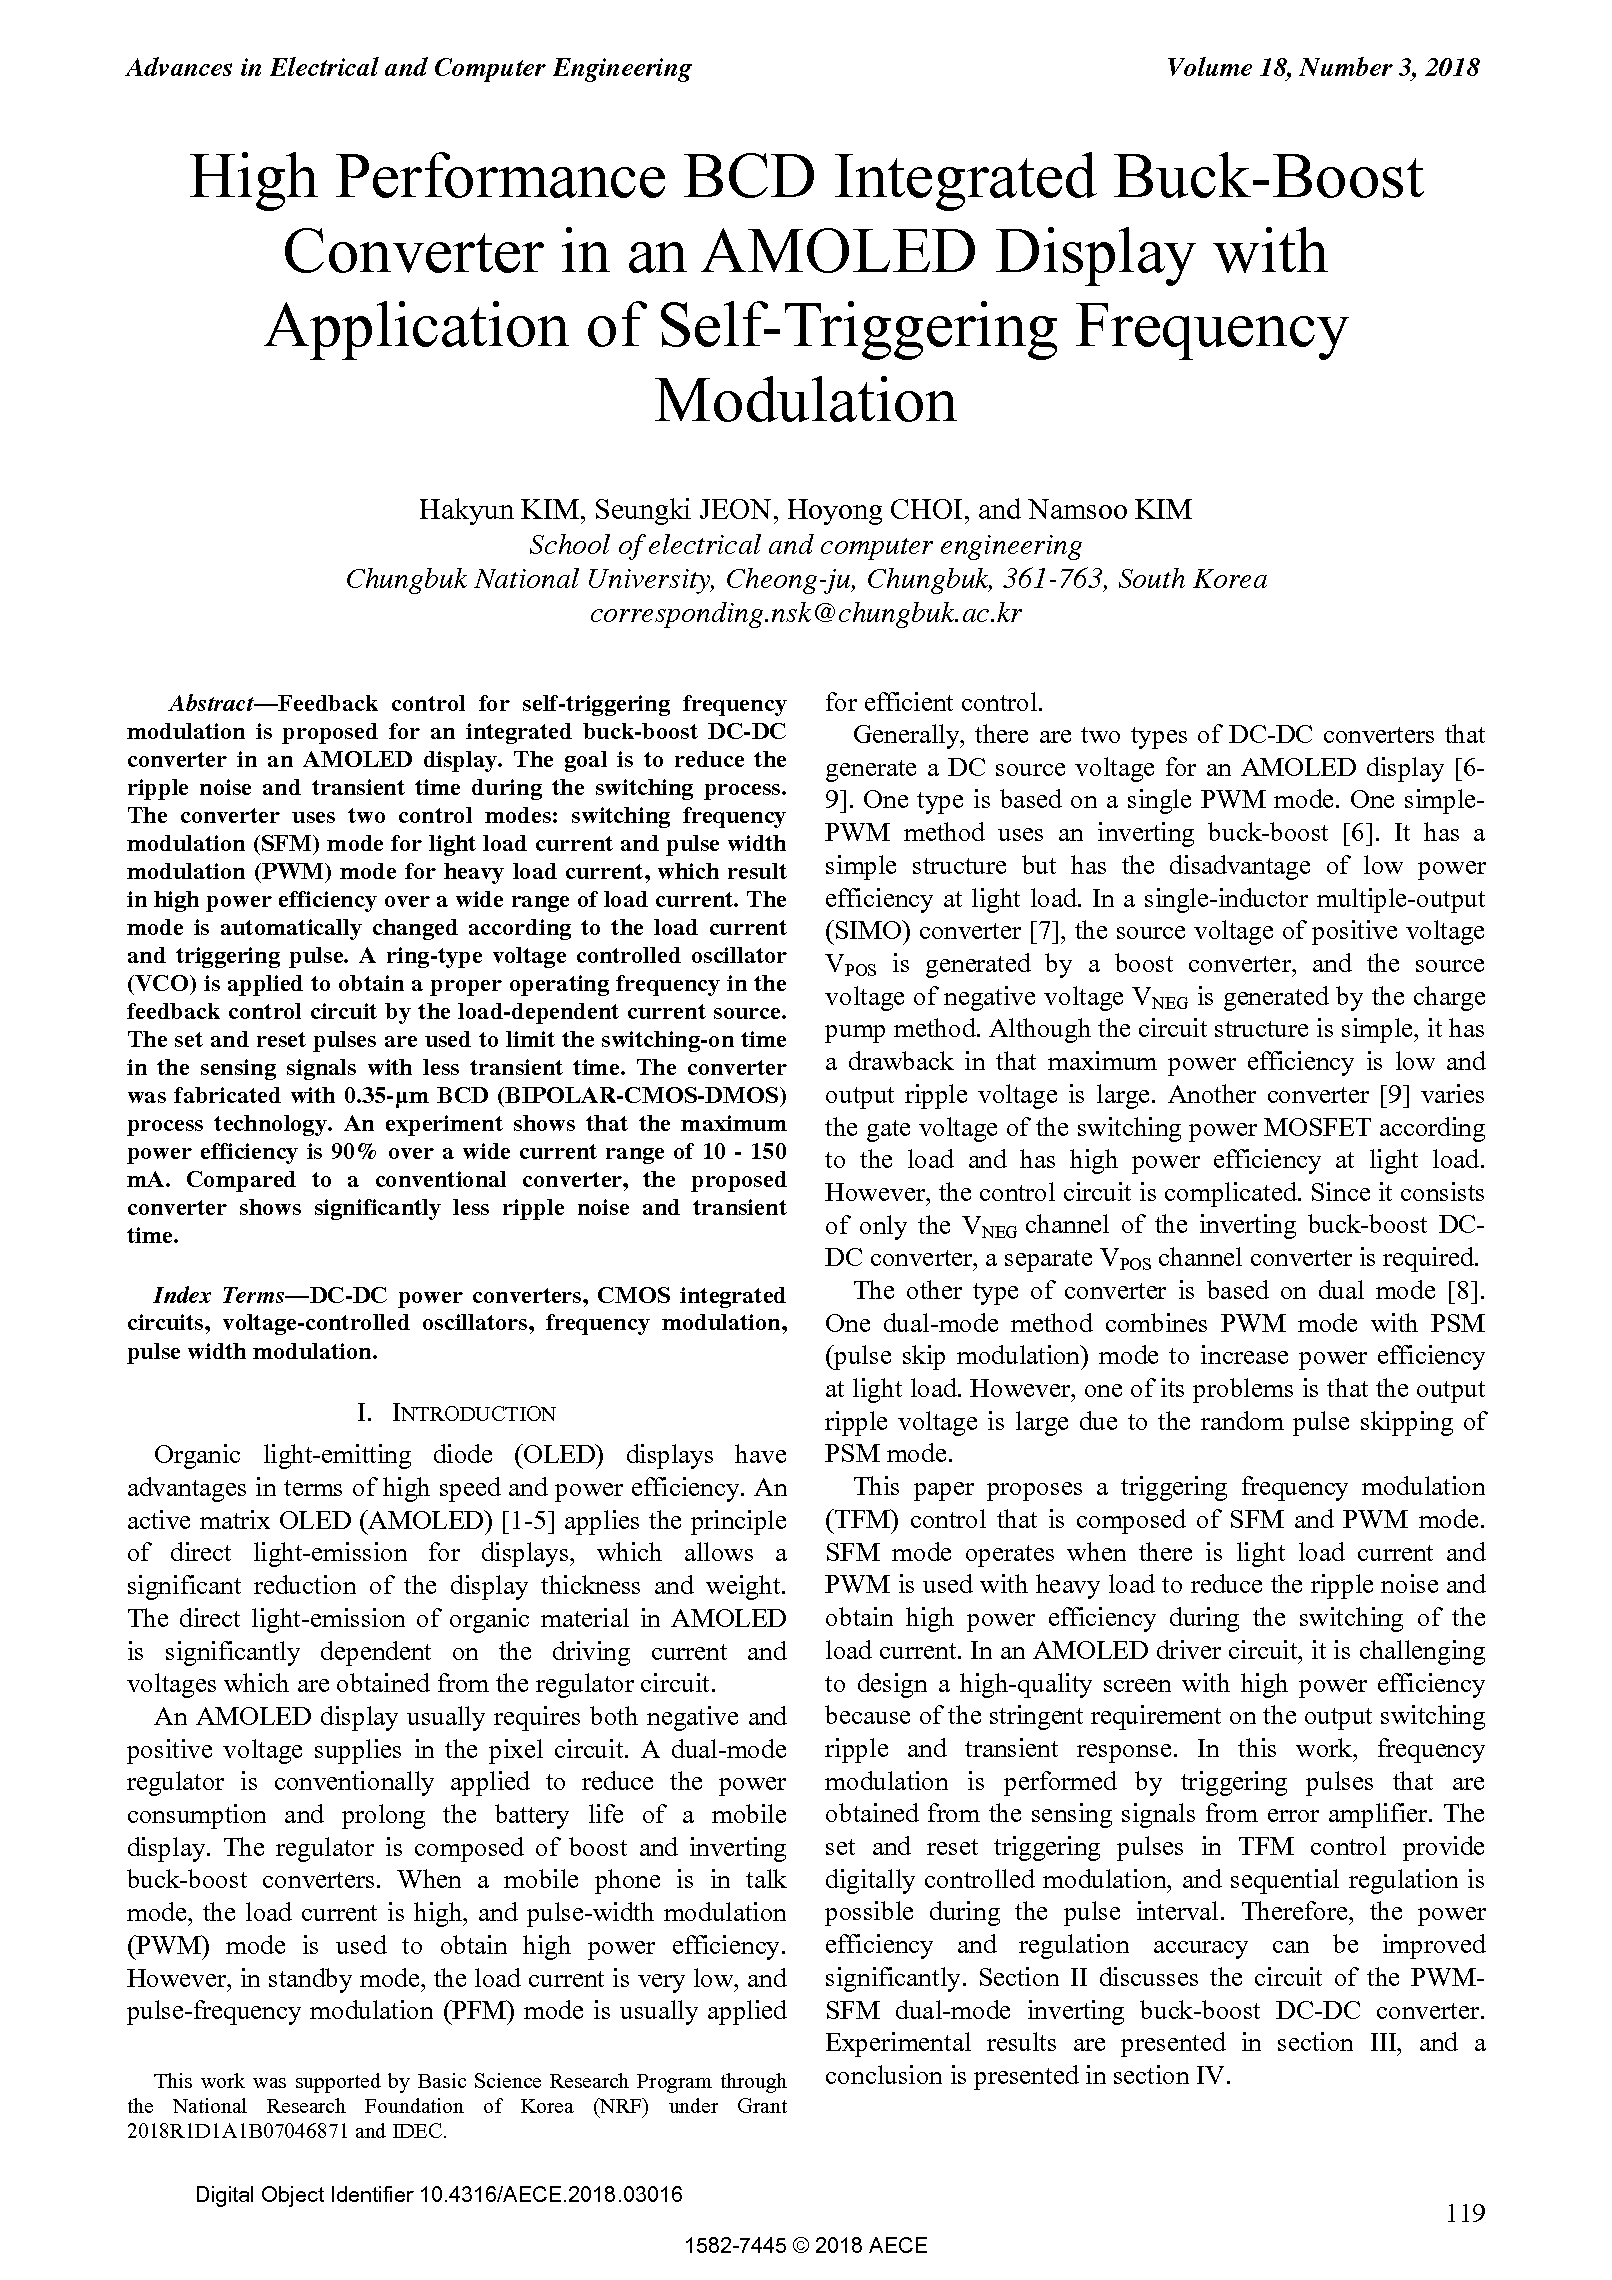 PDF Quickview for paper with DOI:10.4316/AECE.2018.03016